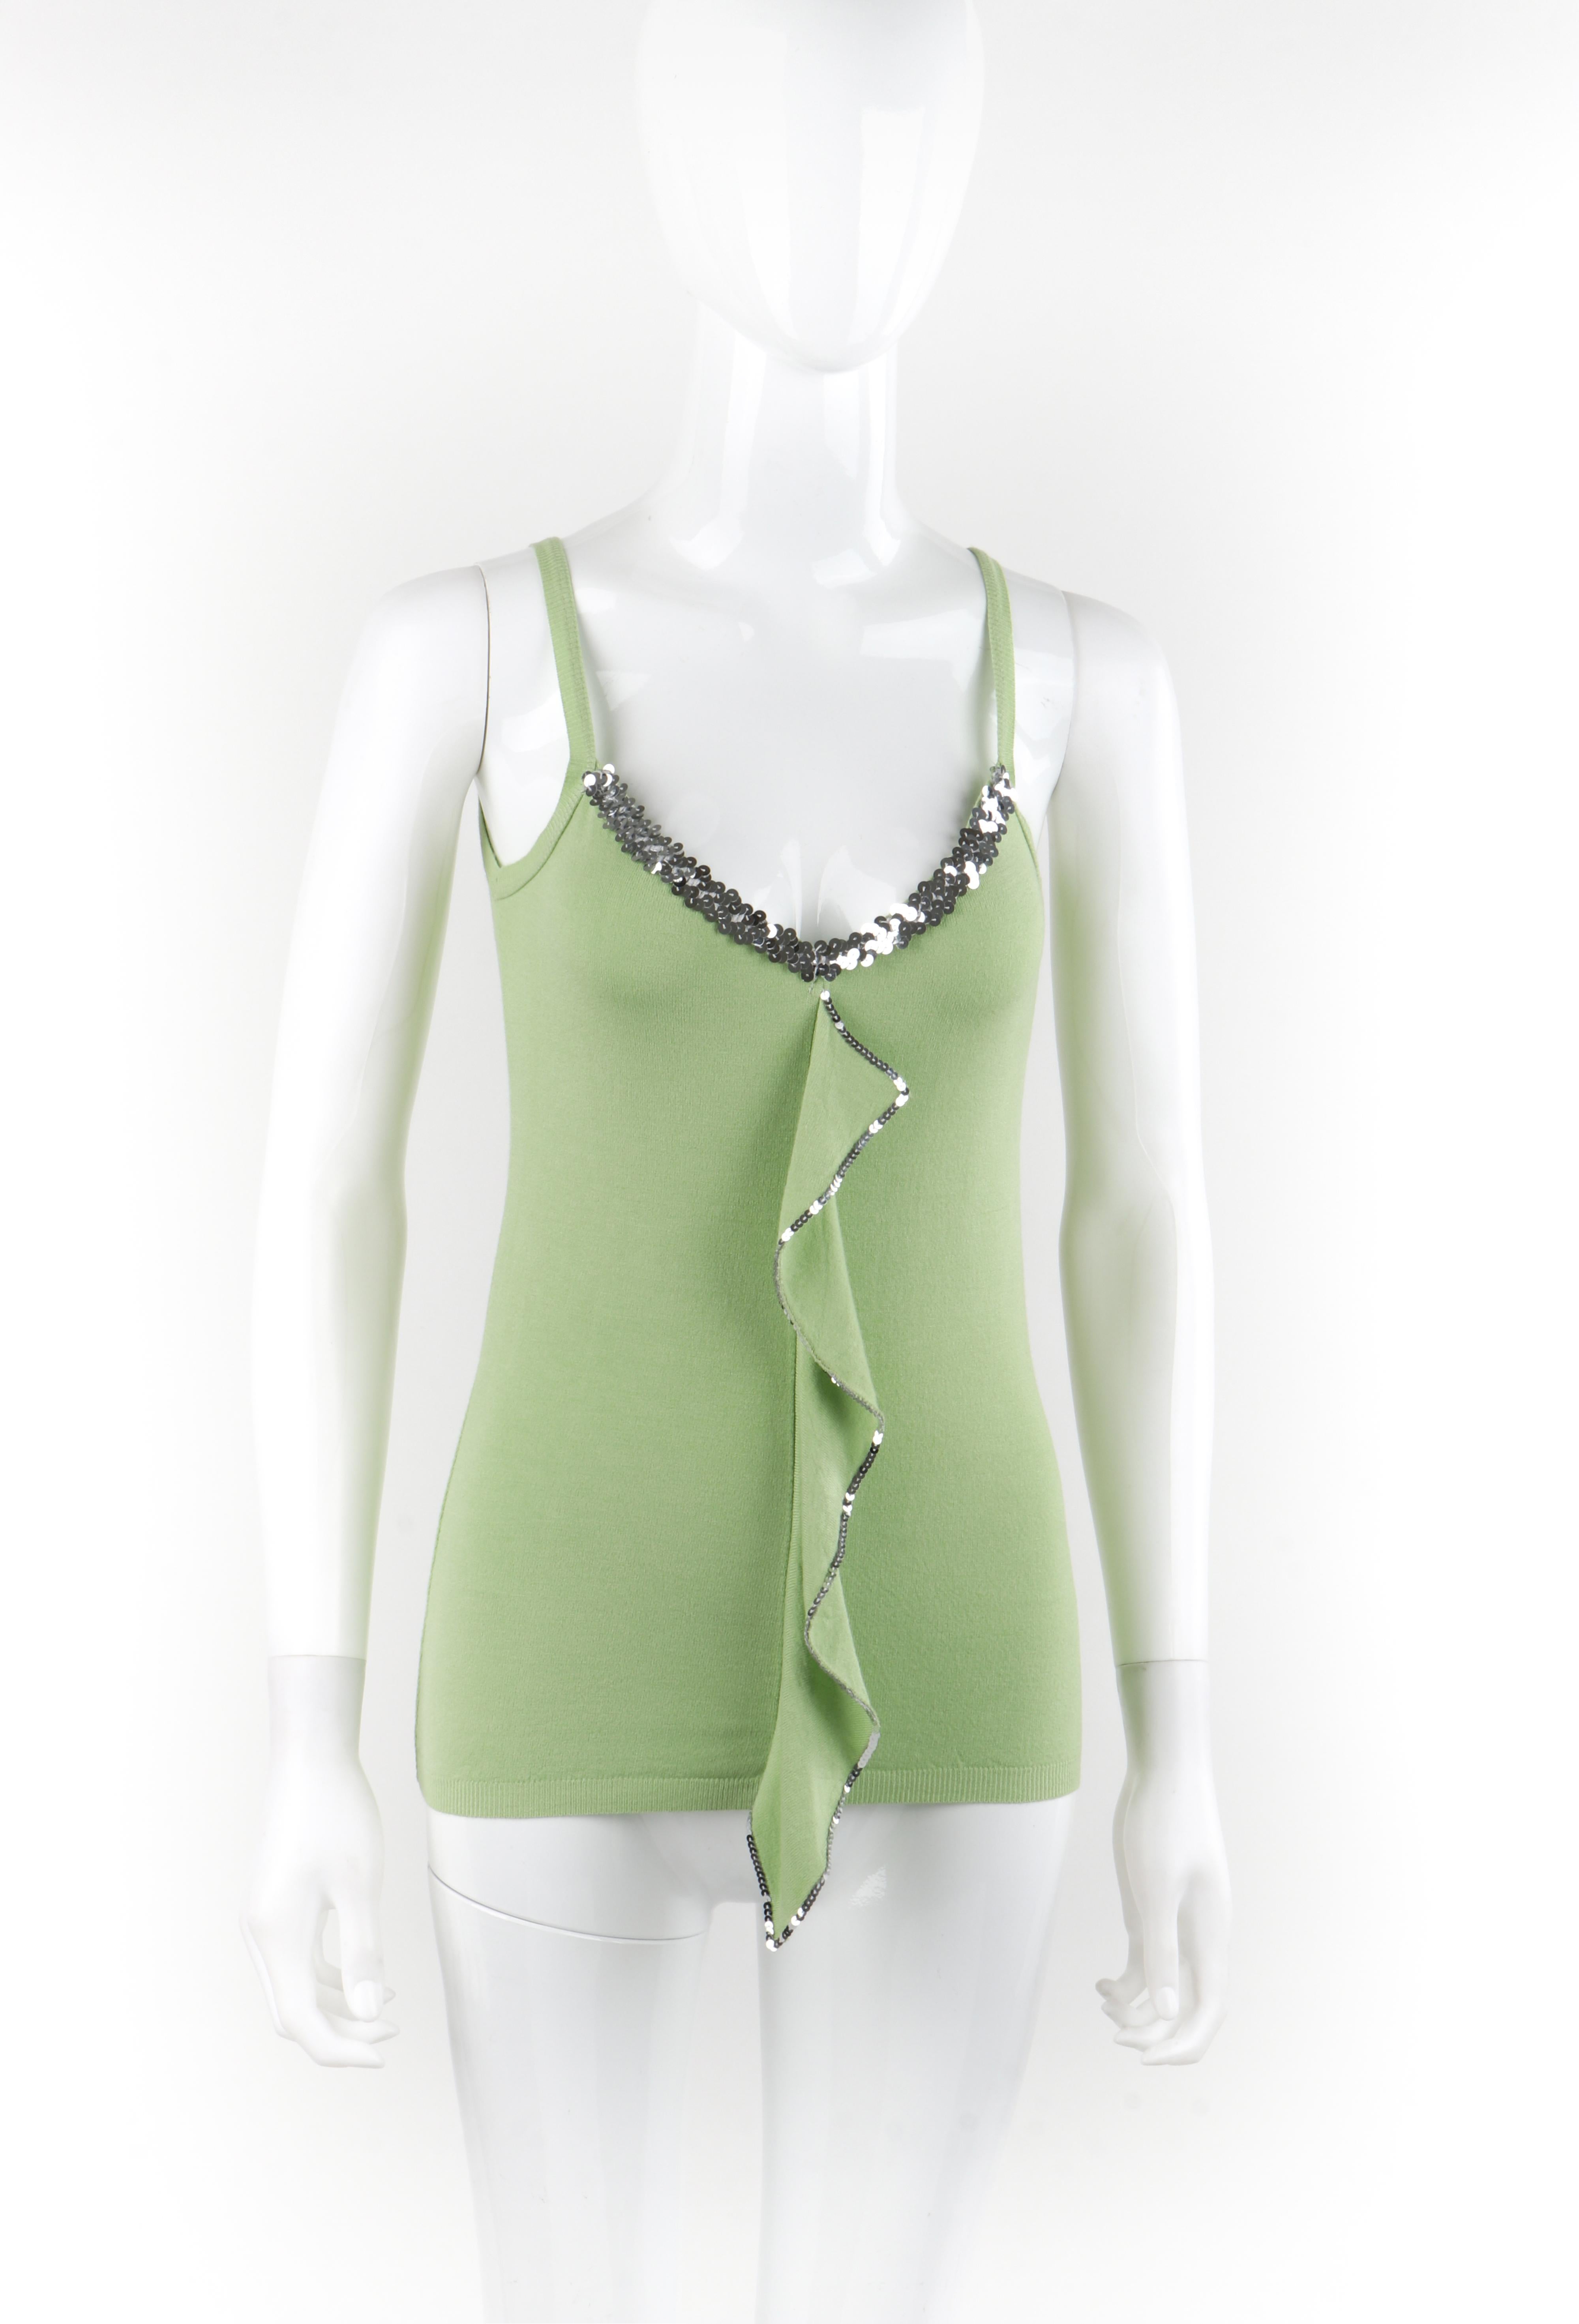 ALEXANDER McQUEEN c.1990s Green Stretch Knit Sequin Ruffle Tank Top In Good Condition For Sale In Thiensville, WI